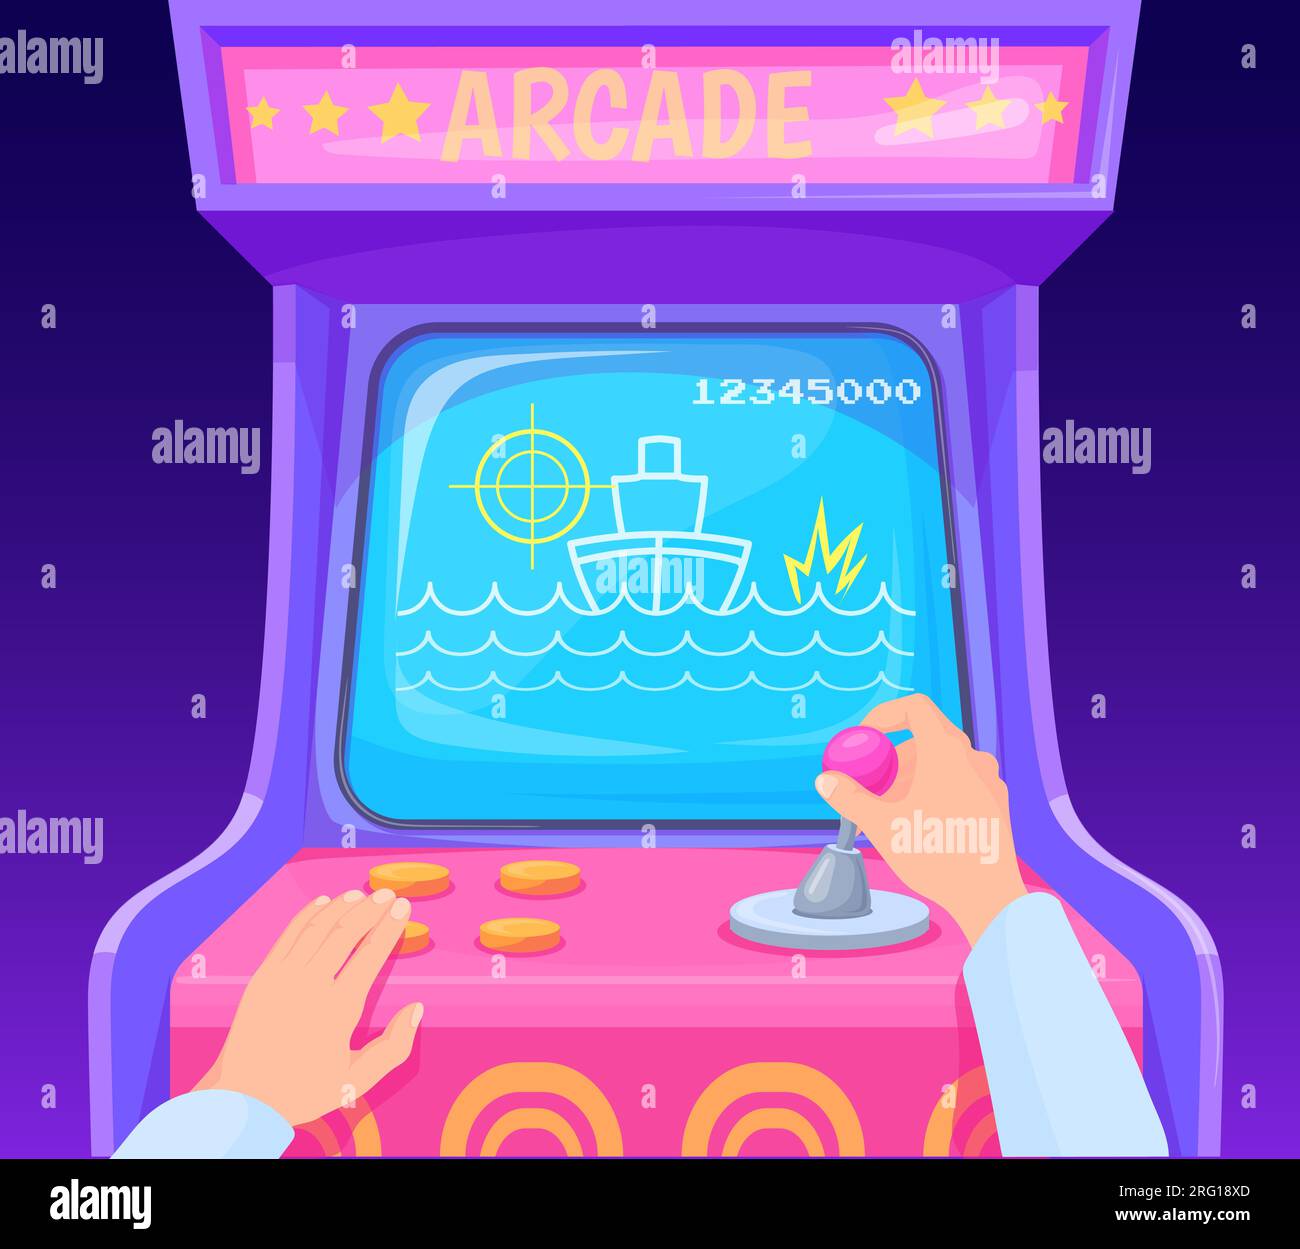 Hands playing arcade machine. Gamer hand play in video game on joystick, computer gaming 80s 1990s pixel screen of slot machines controller, neat vector illustration of arcade machine with joystick Stock Vector